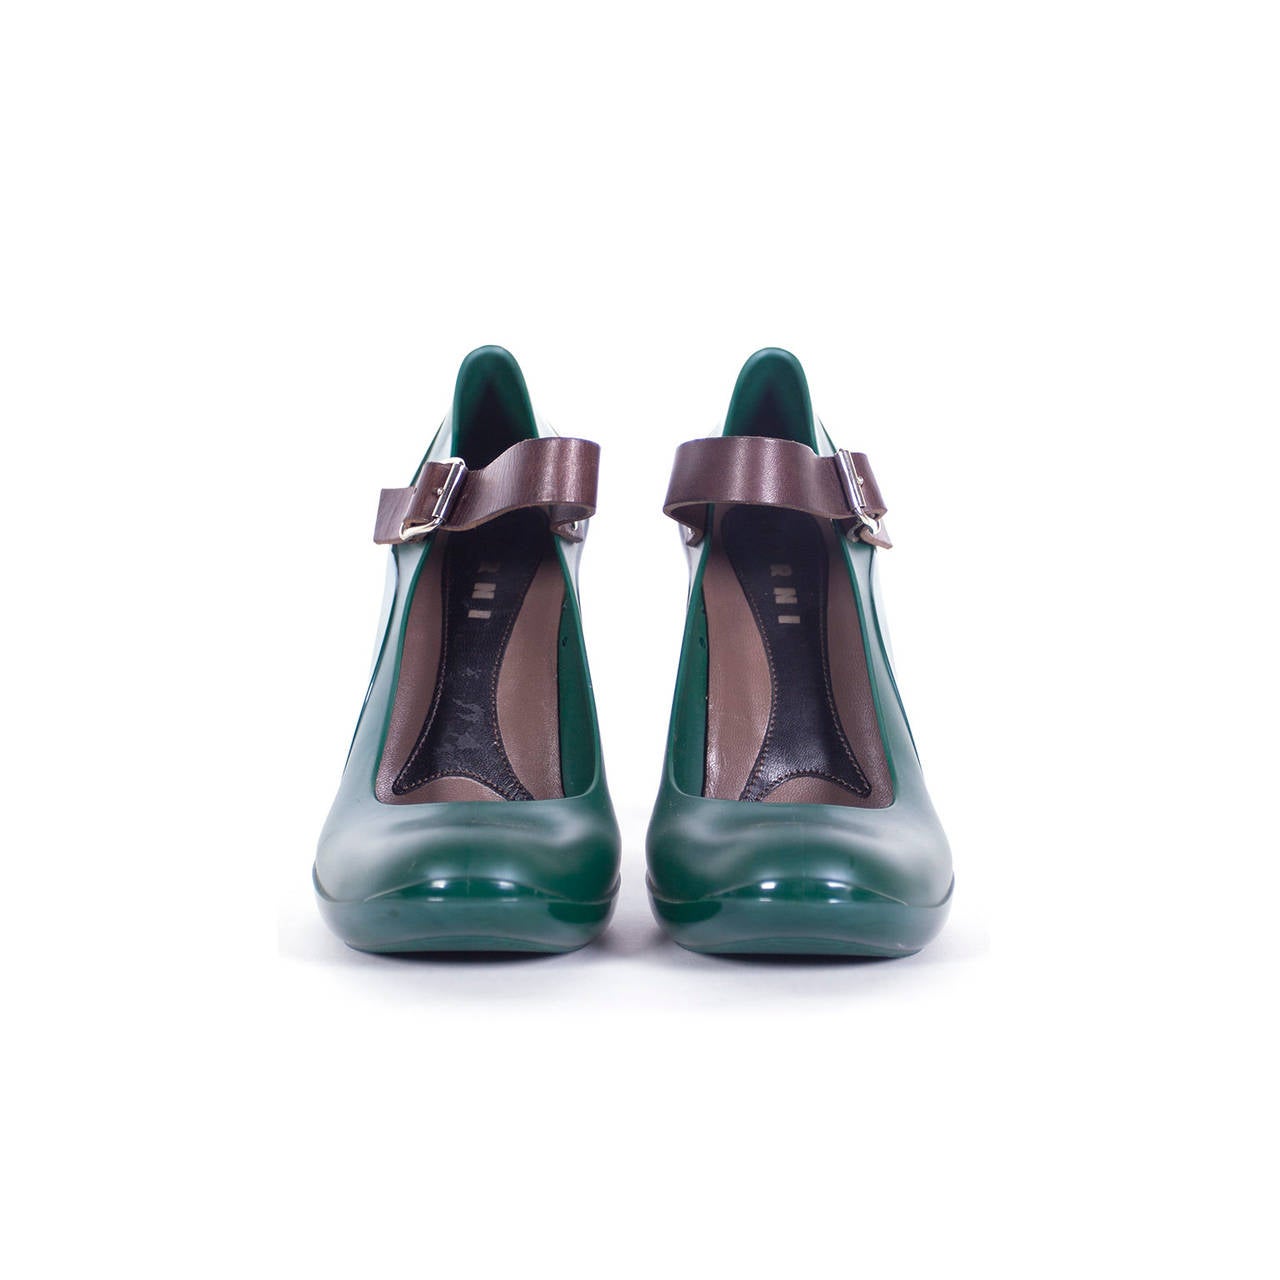 Marni forest green mary jane style rubber high heels with brown leather strap.
Shoes are a glossy finish with a mate brown leather strap at ankle with a buckle and a snap for closure. Made in Italy. EU size 41.